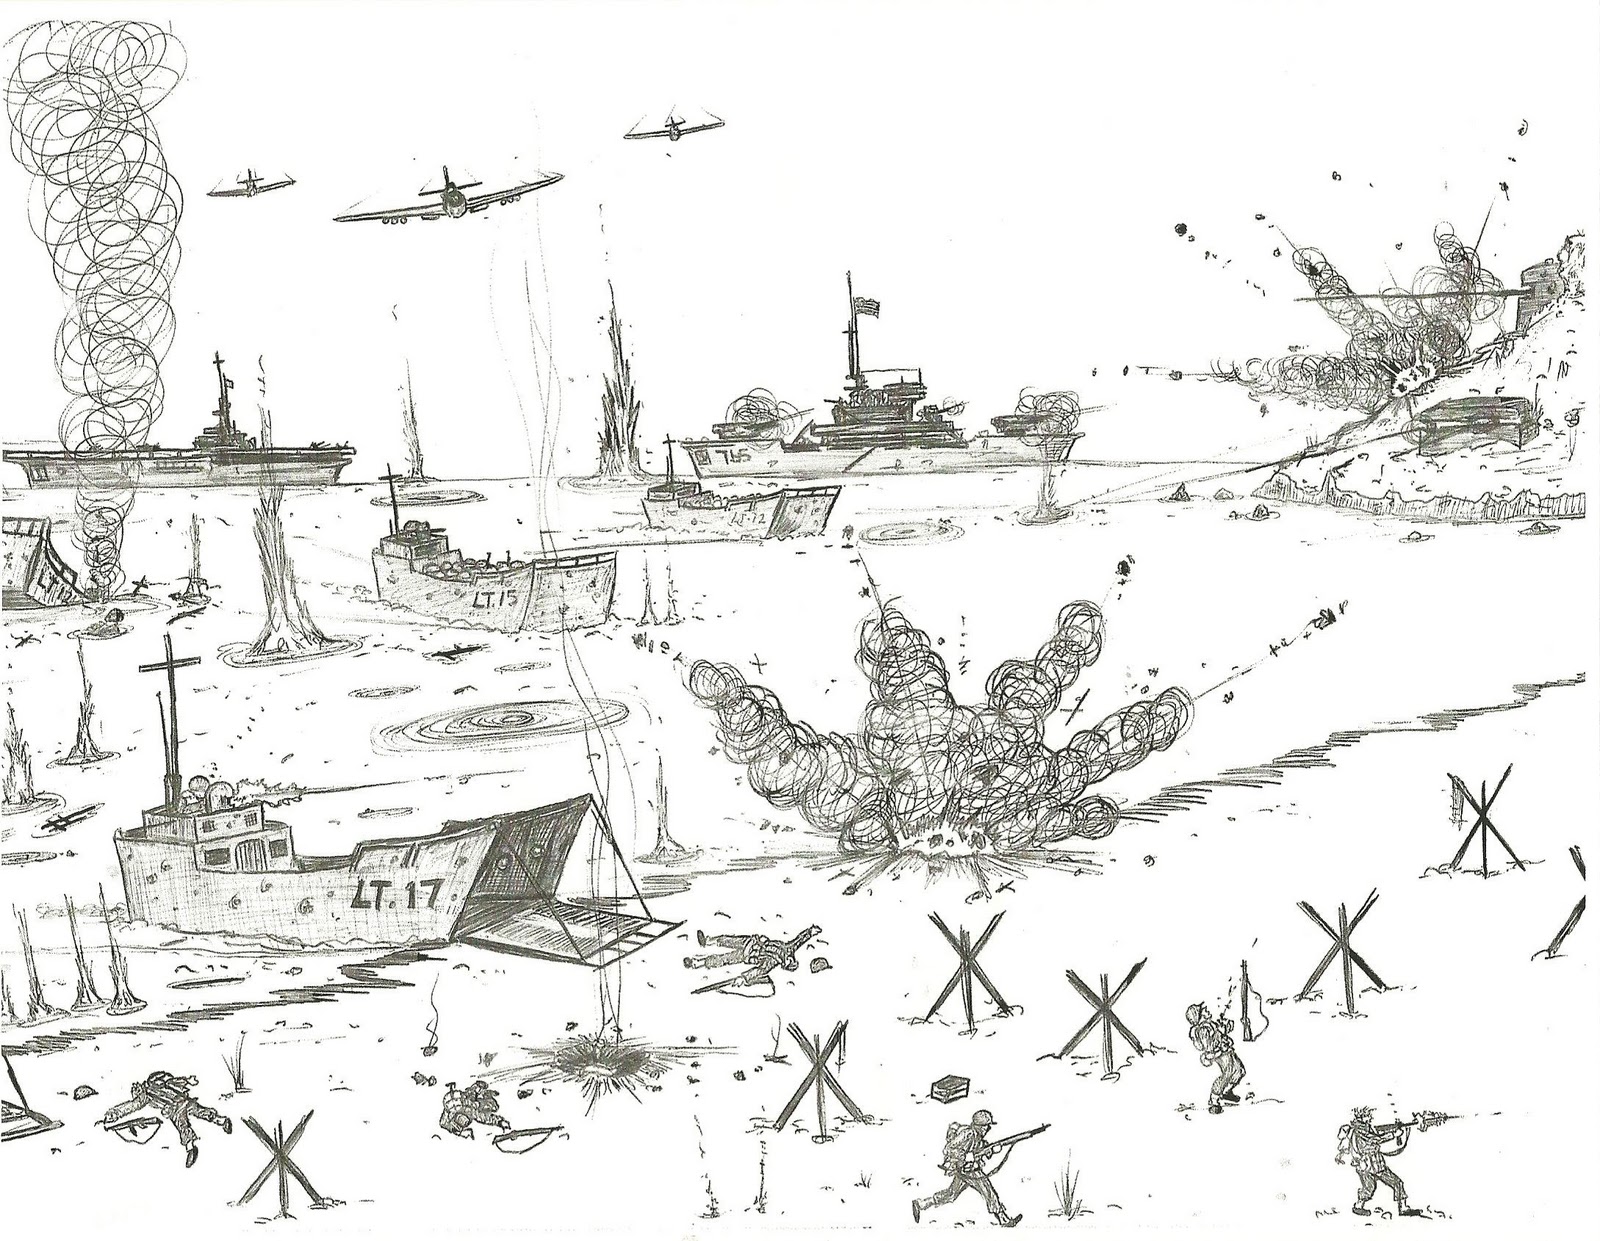 World Of Technology: Drawings of WWII by a Ten Year Old